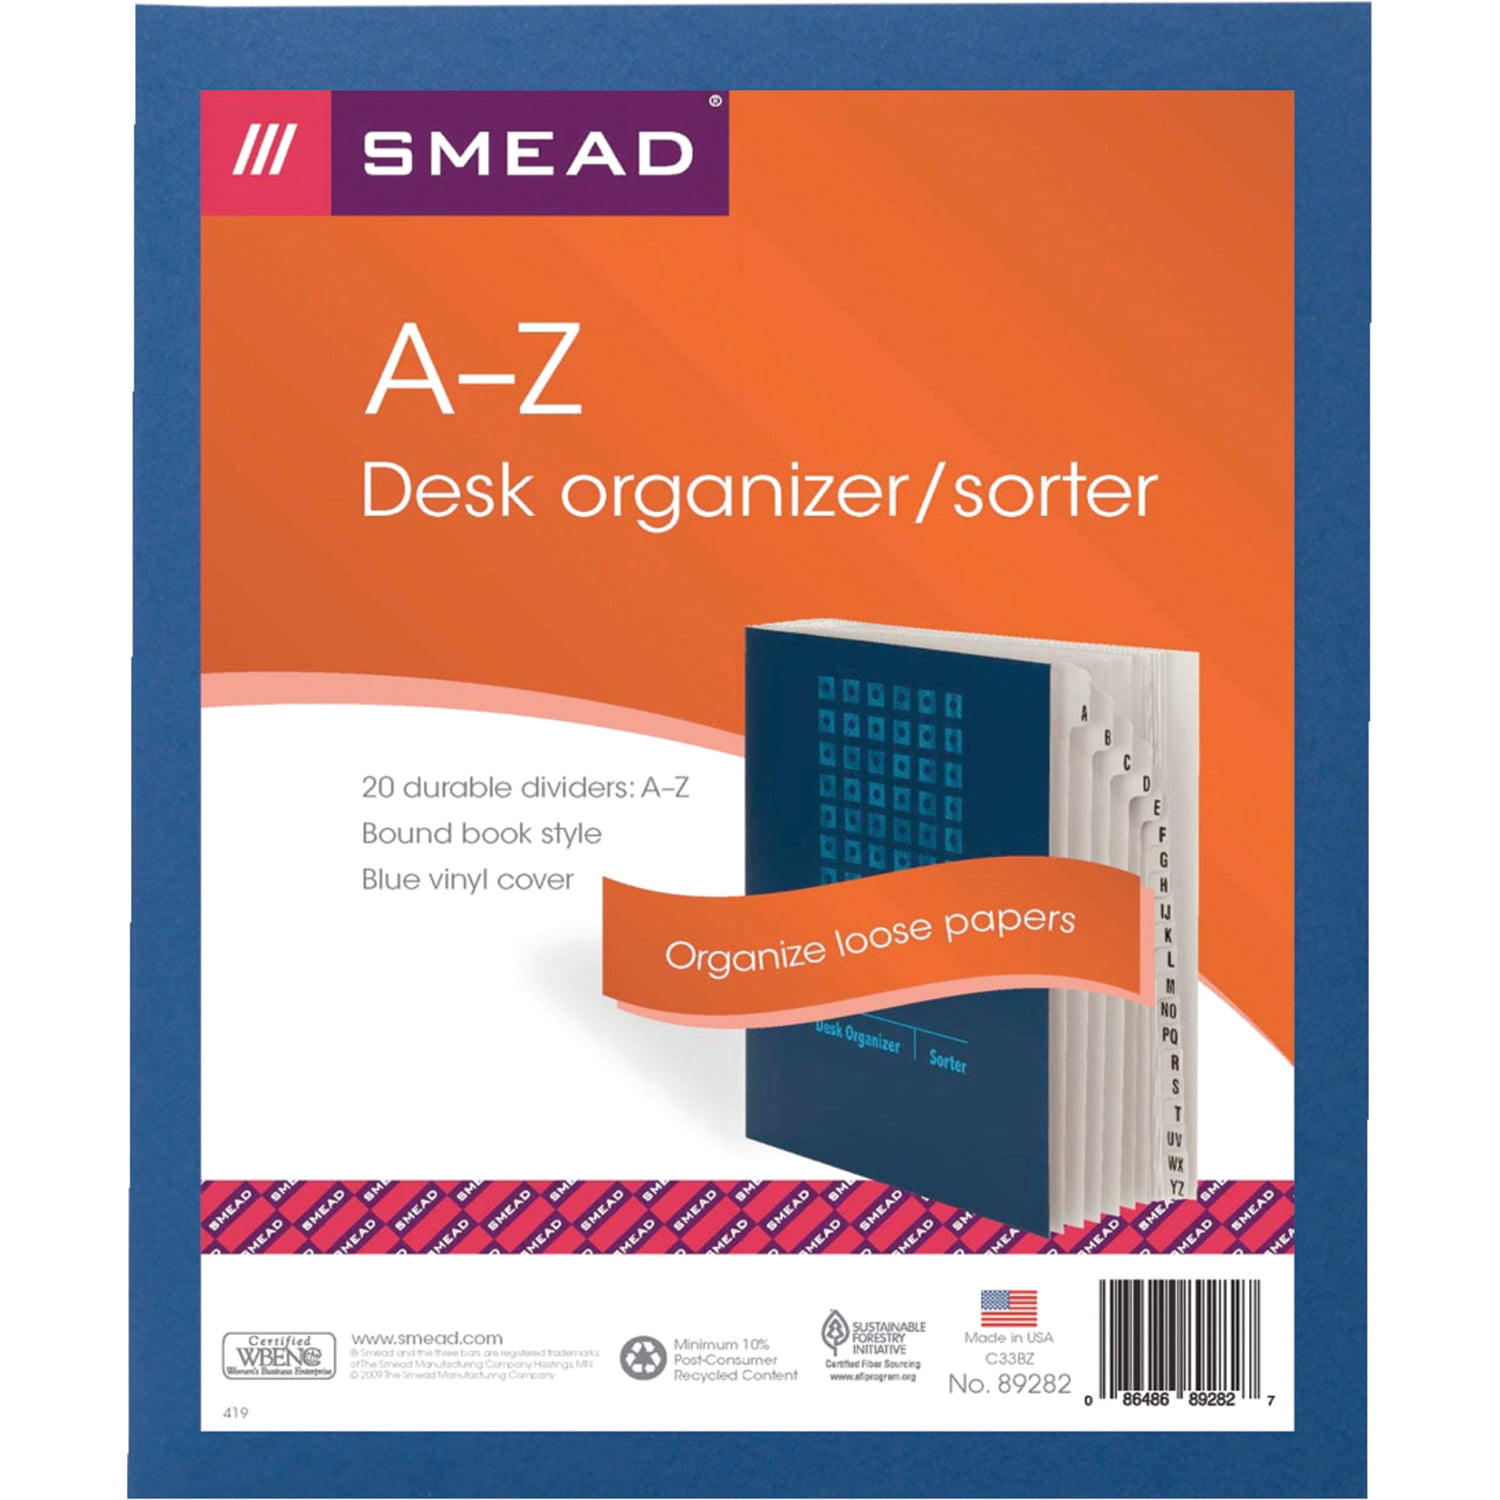 Details about   Desk File Sorter Snead A-Z Alphabetical Accordion style Gently used Very sturdy 